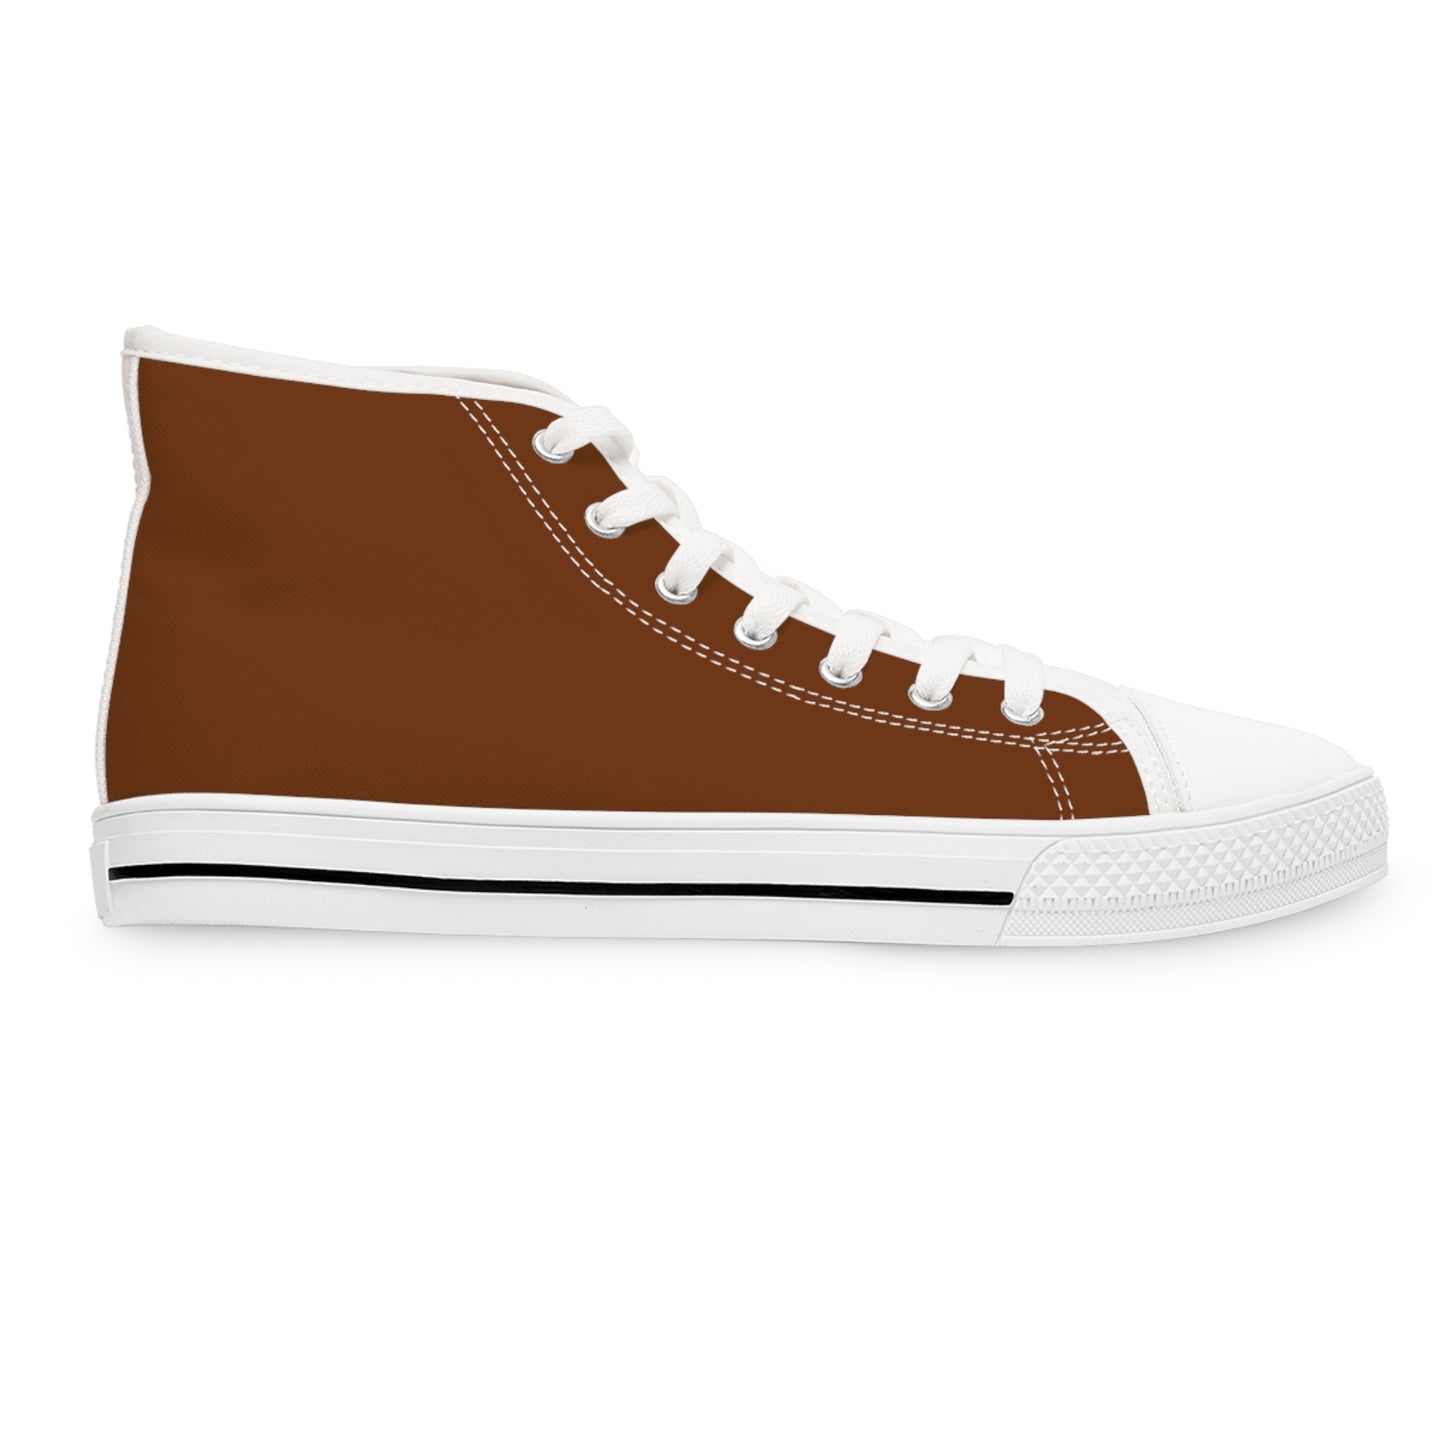 Women's Canvas High Top Solid Color Sneakers - Rotten Orange US 12 White sole